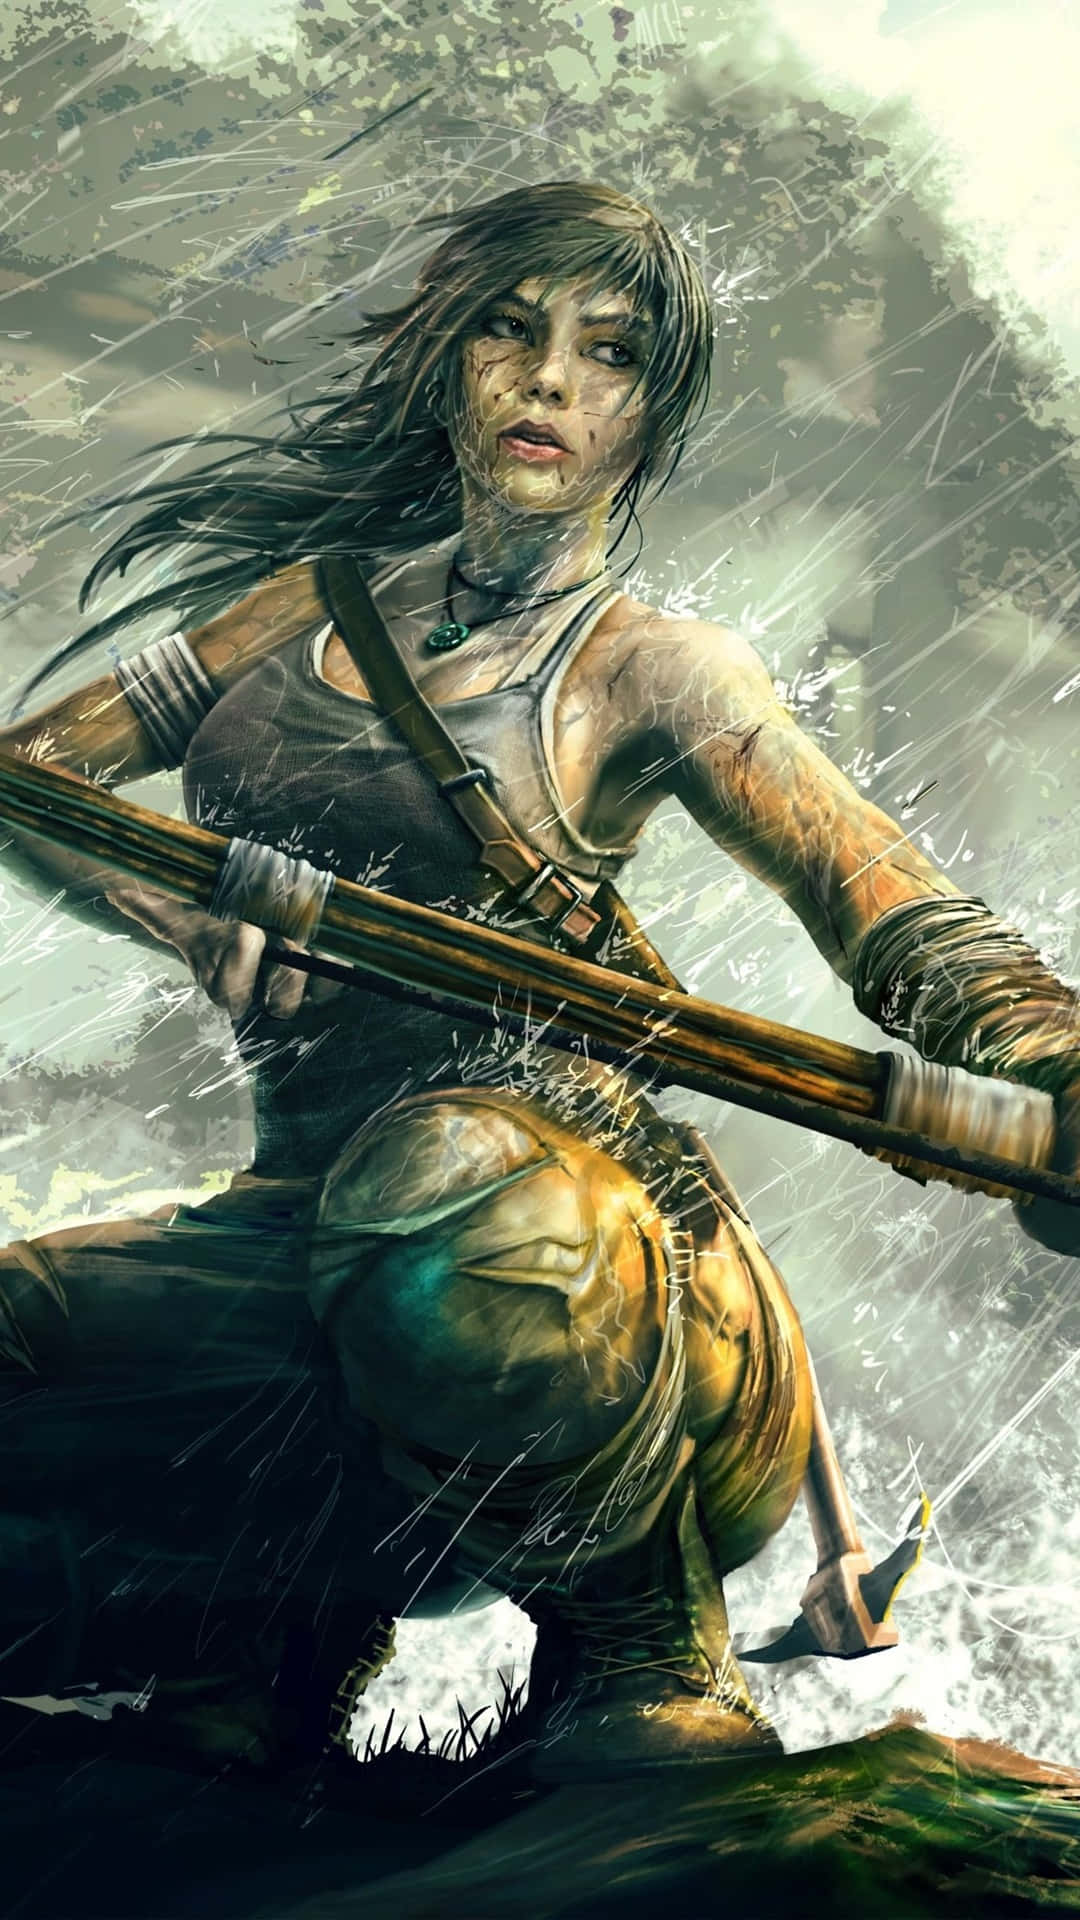 A Woman With A Sword Is Standing In The Rain